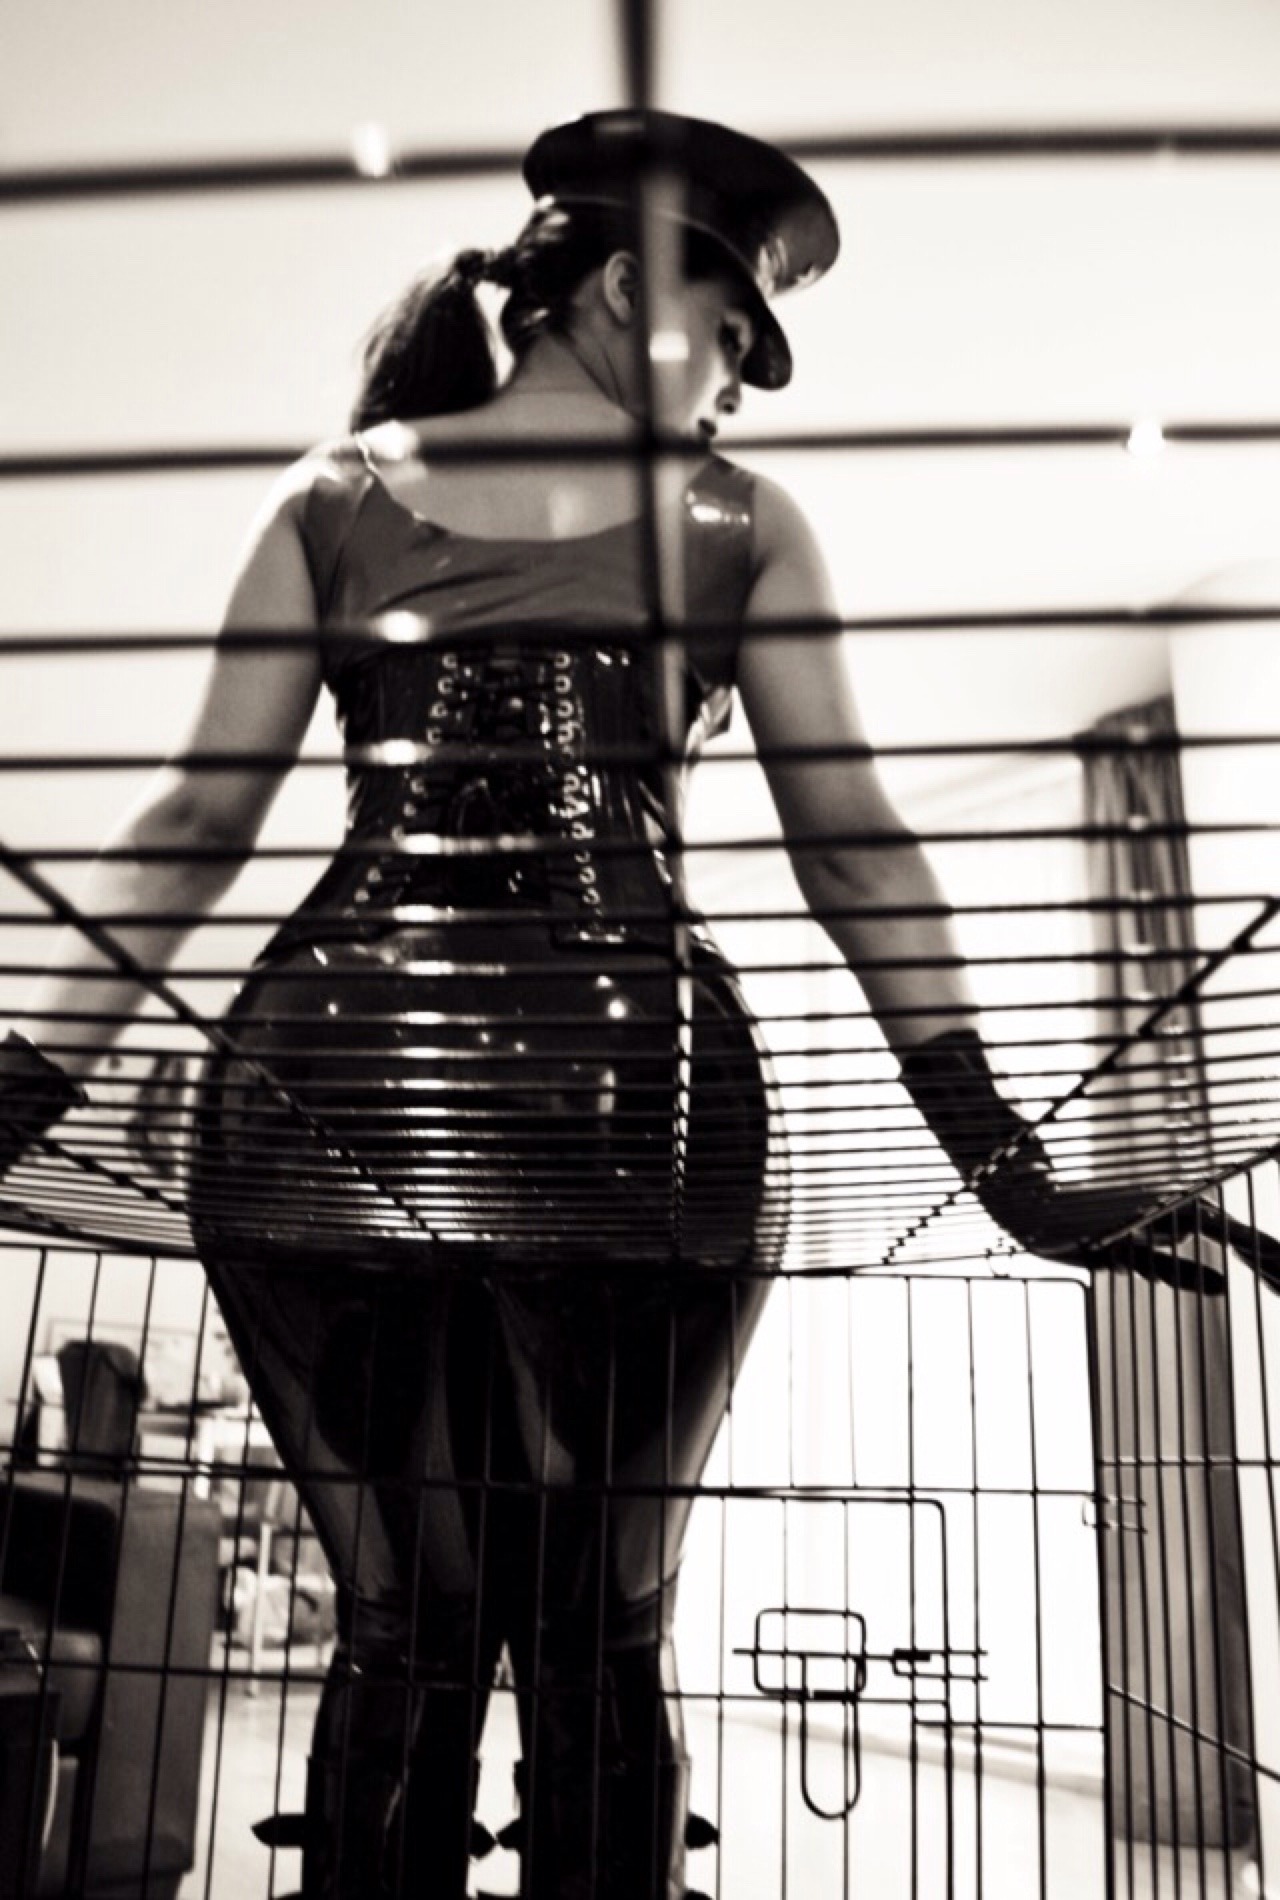 domme-ms:C’mon, slave! Time to please Domme! *